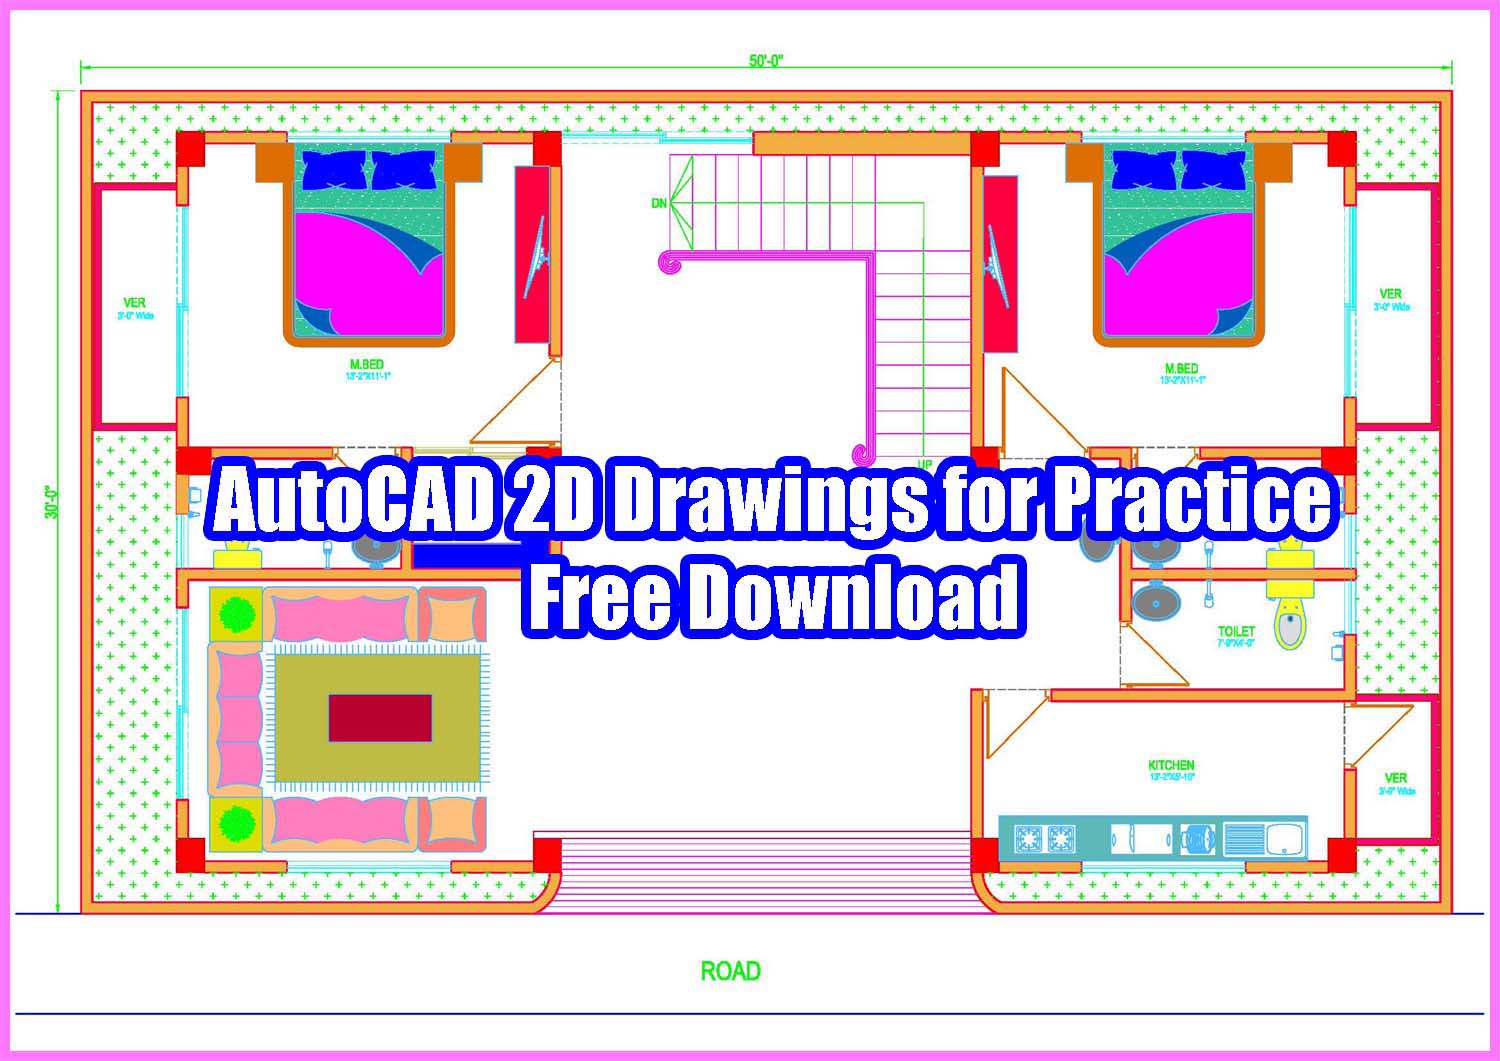 Autocad 2D drawings , autocad 3d drawings | Freelancer